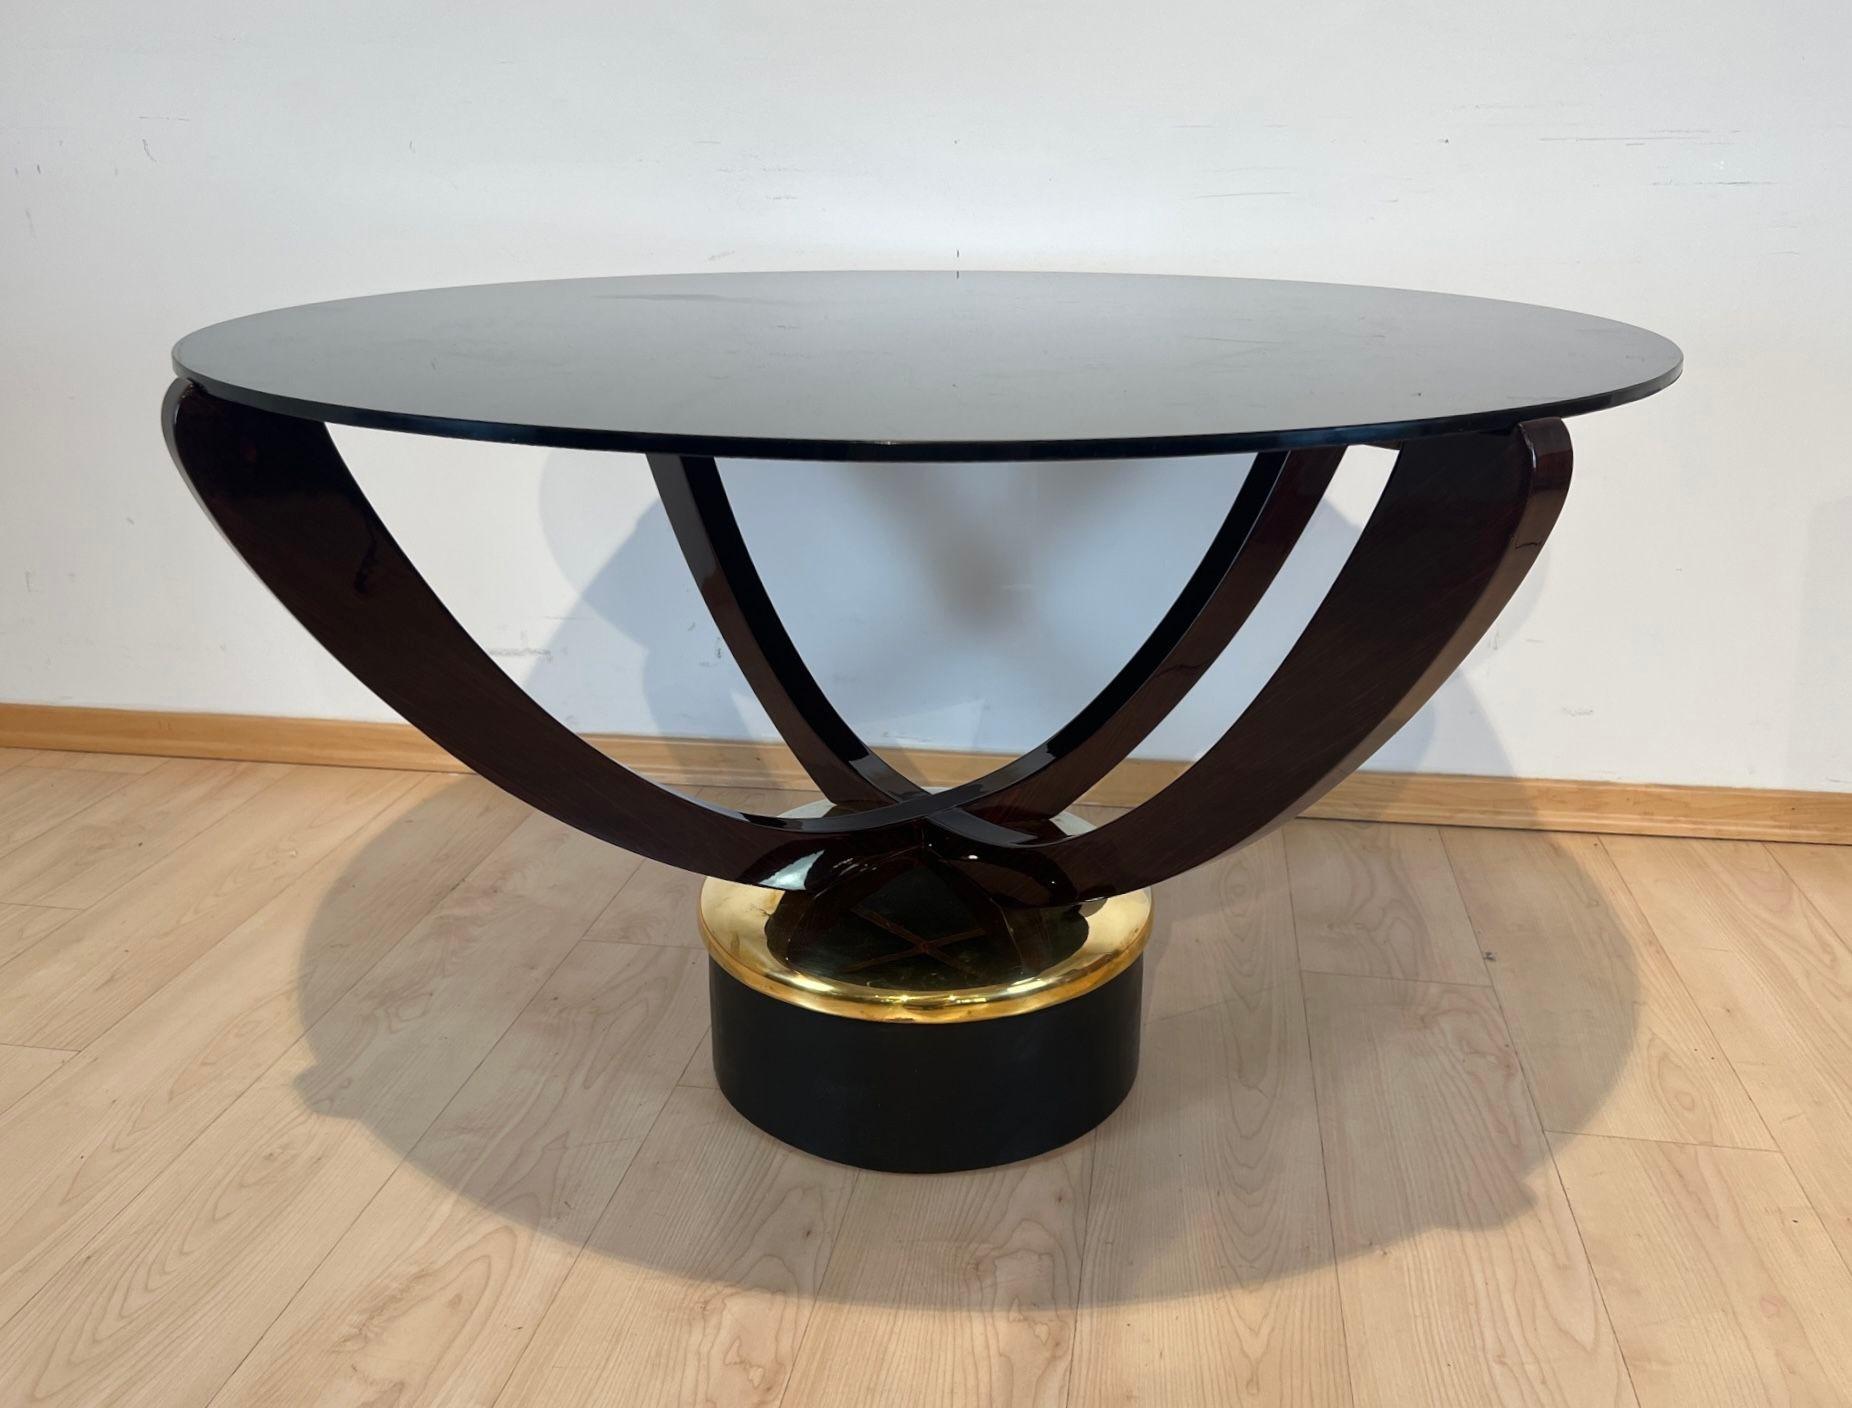 Large round Art Deco coffee table from France around 1930.
Four legged Rosewood frame, lacquered. Polished metal base with protective varnish, covered with blackened leather.
Large original glass top with scratches (could be replaced if